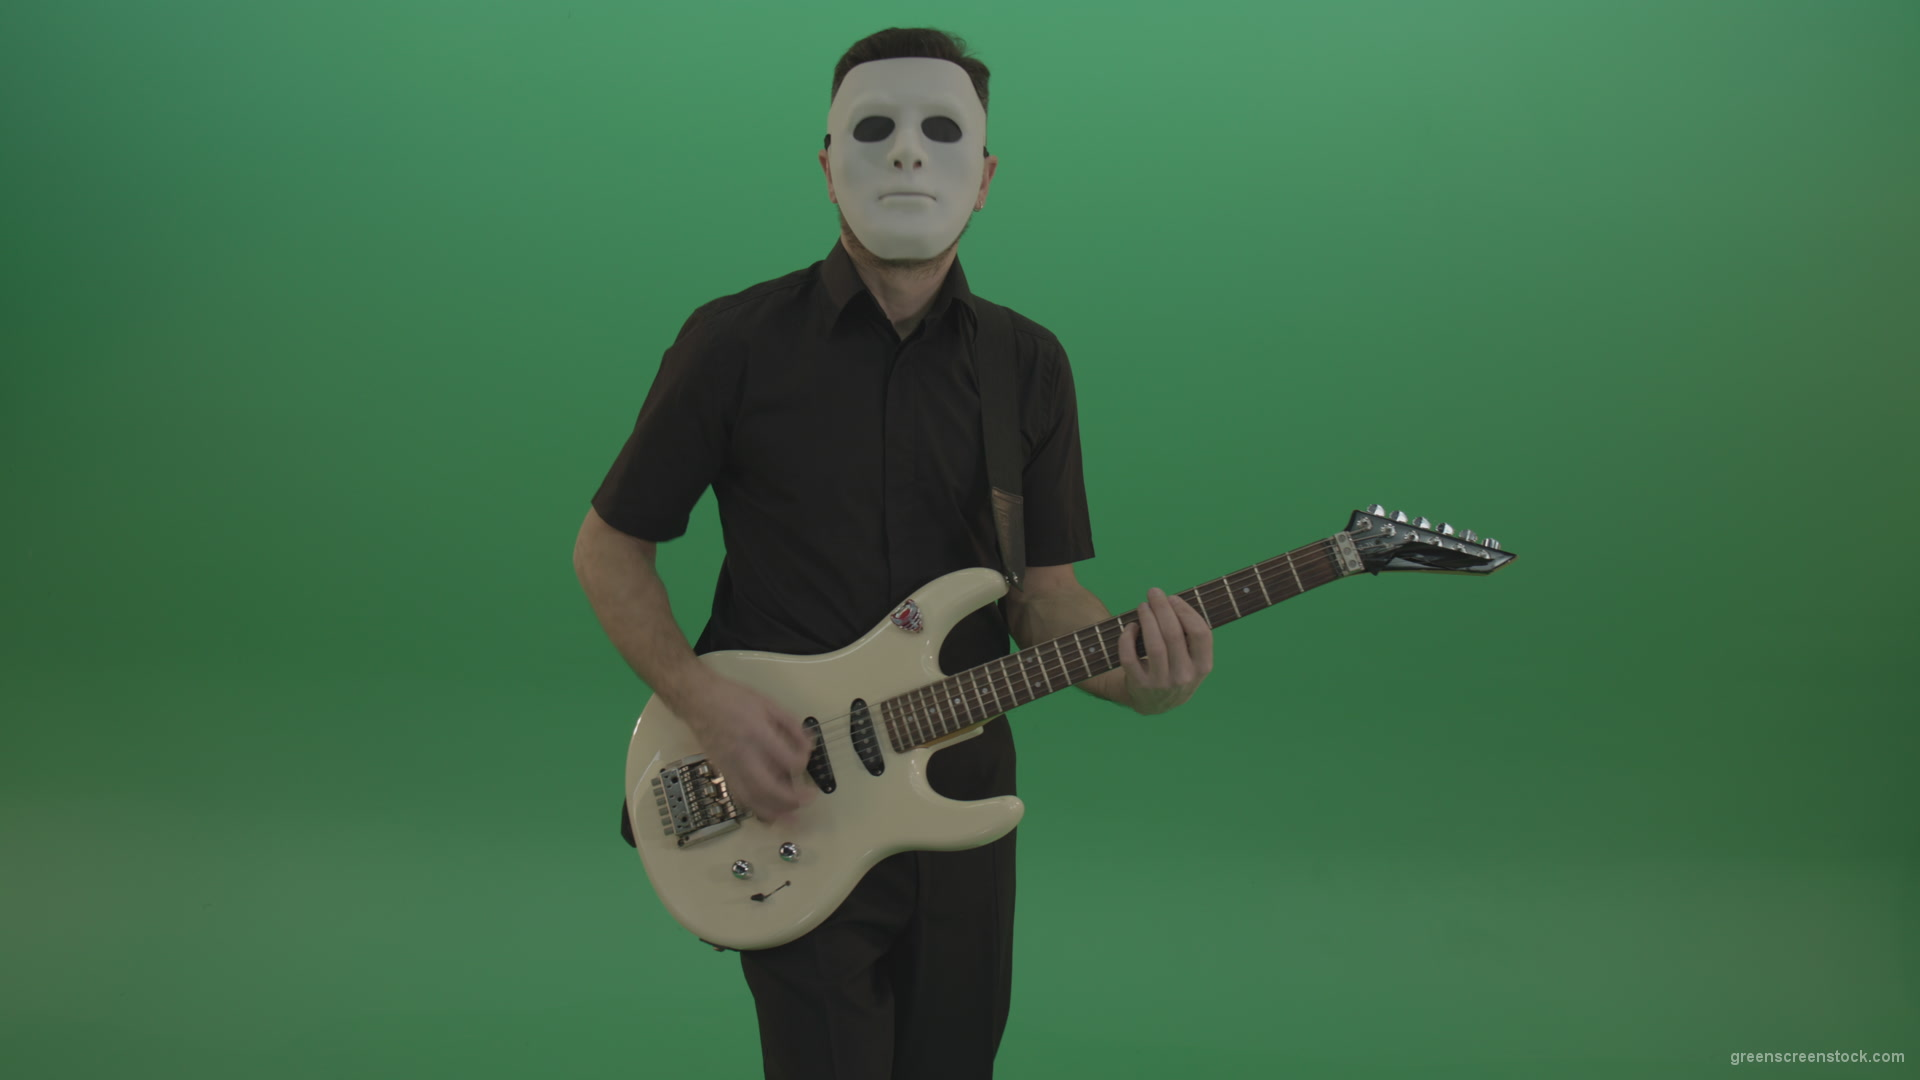 Rock-man-in-white-mask-and-black-wear-playing-guitar-isolated-on-green-screen-in-front-view_002 Green Screen Stock